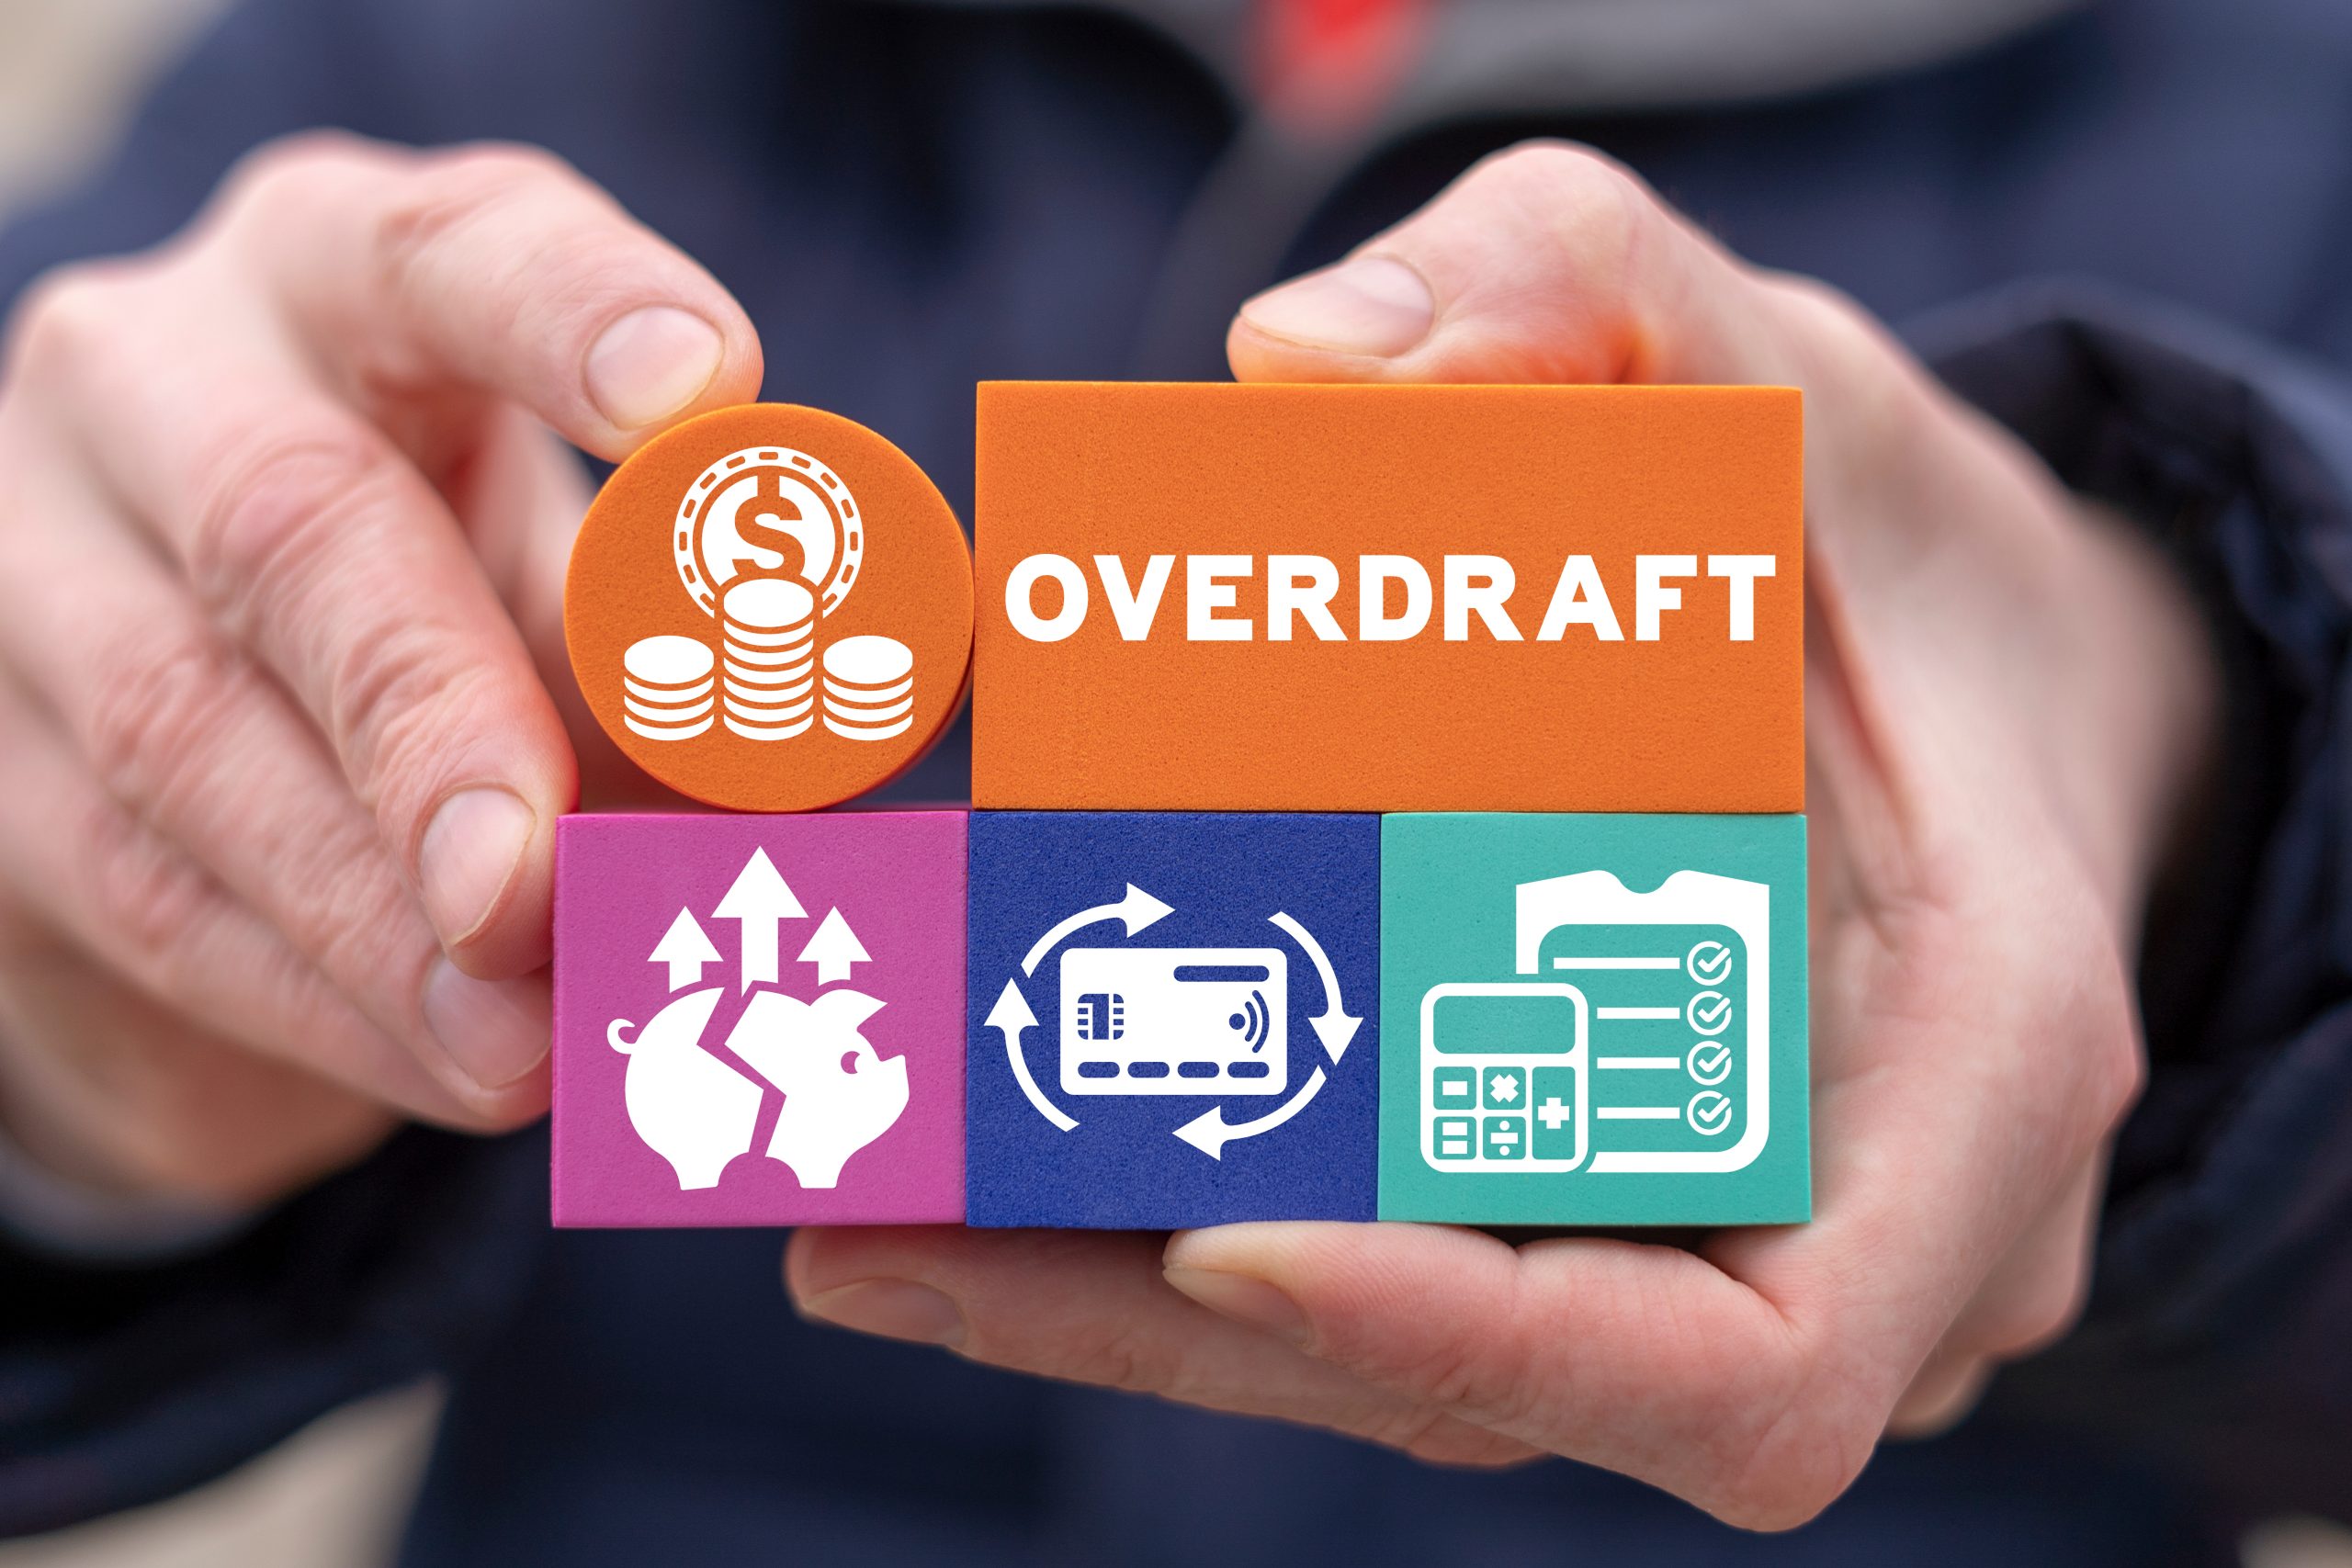 Concept of Overdraft. Over draft bookkeeping finance business.